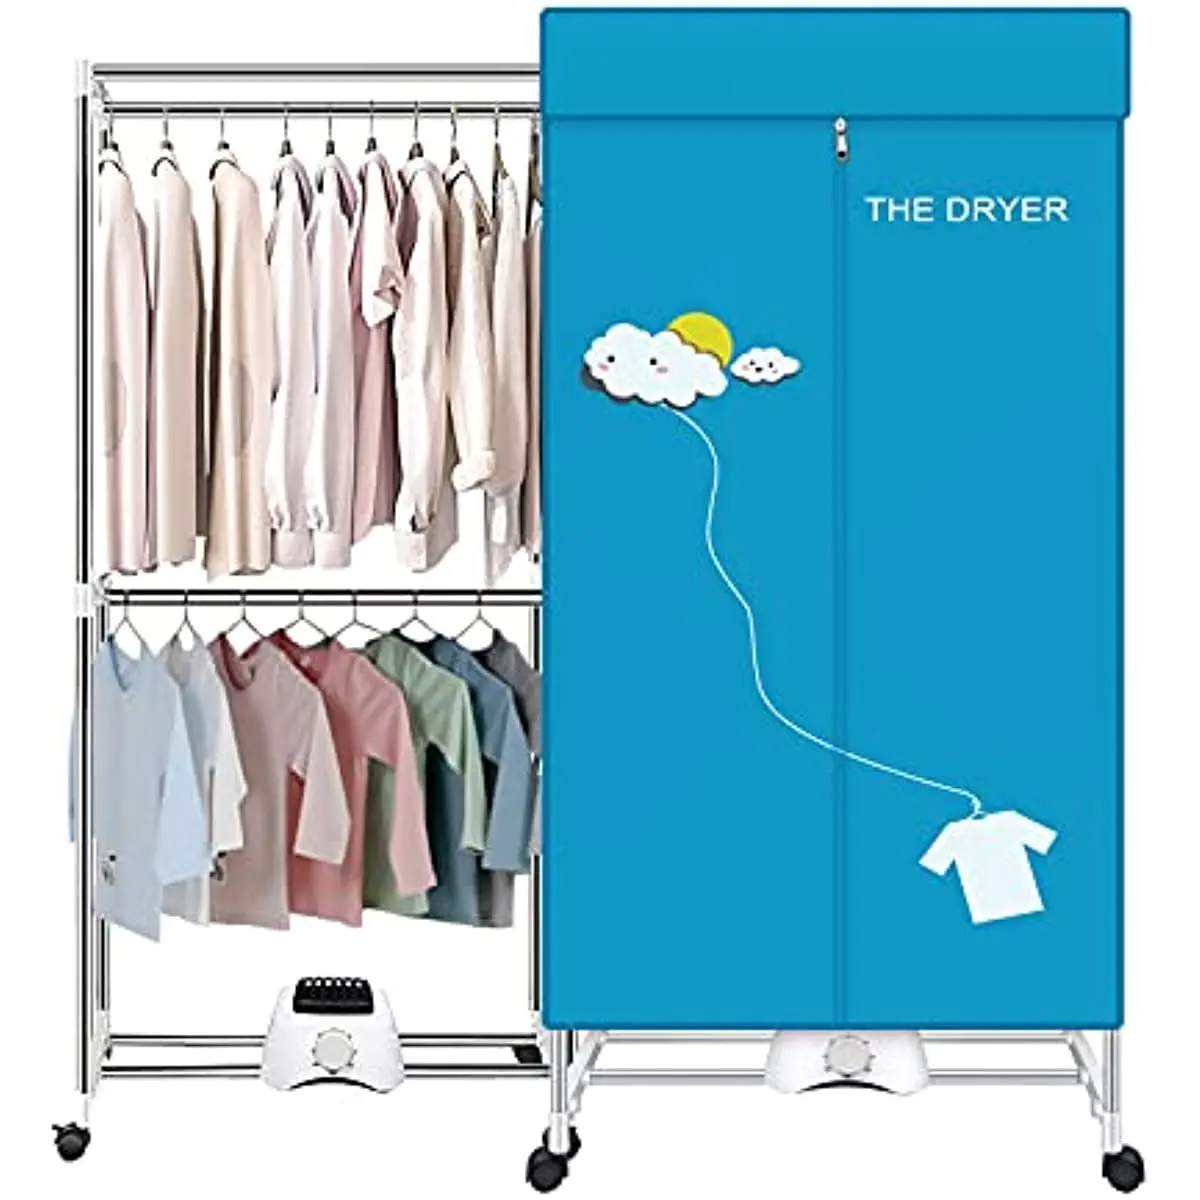 

Portable Dryer,110V 1000W Electric Clothes Dryer Machine Double layer Stackable Clothes Drying Rack for Apartments, RV,Laundry